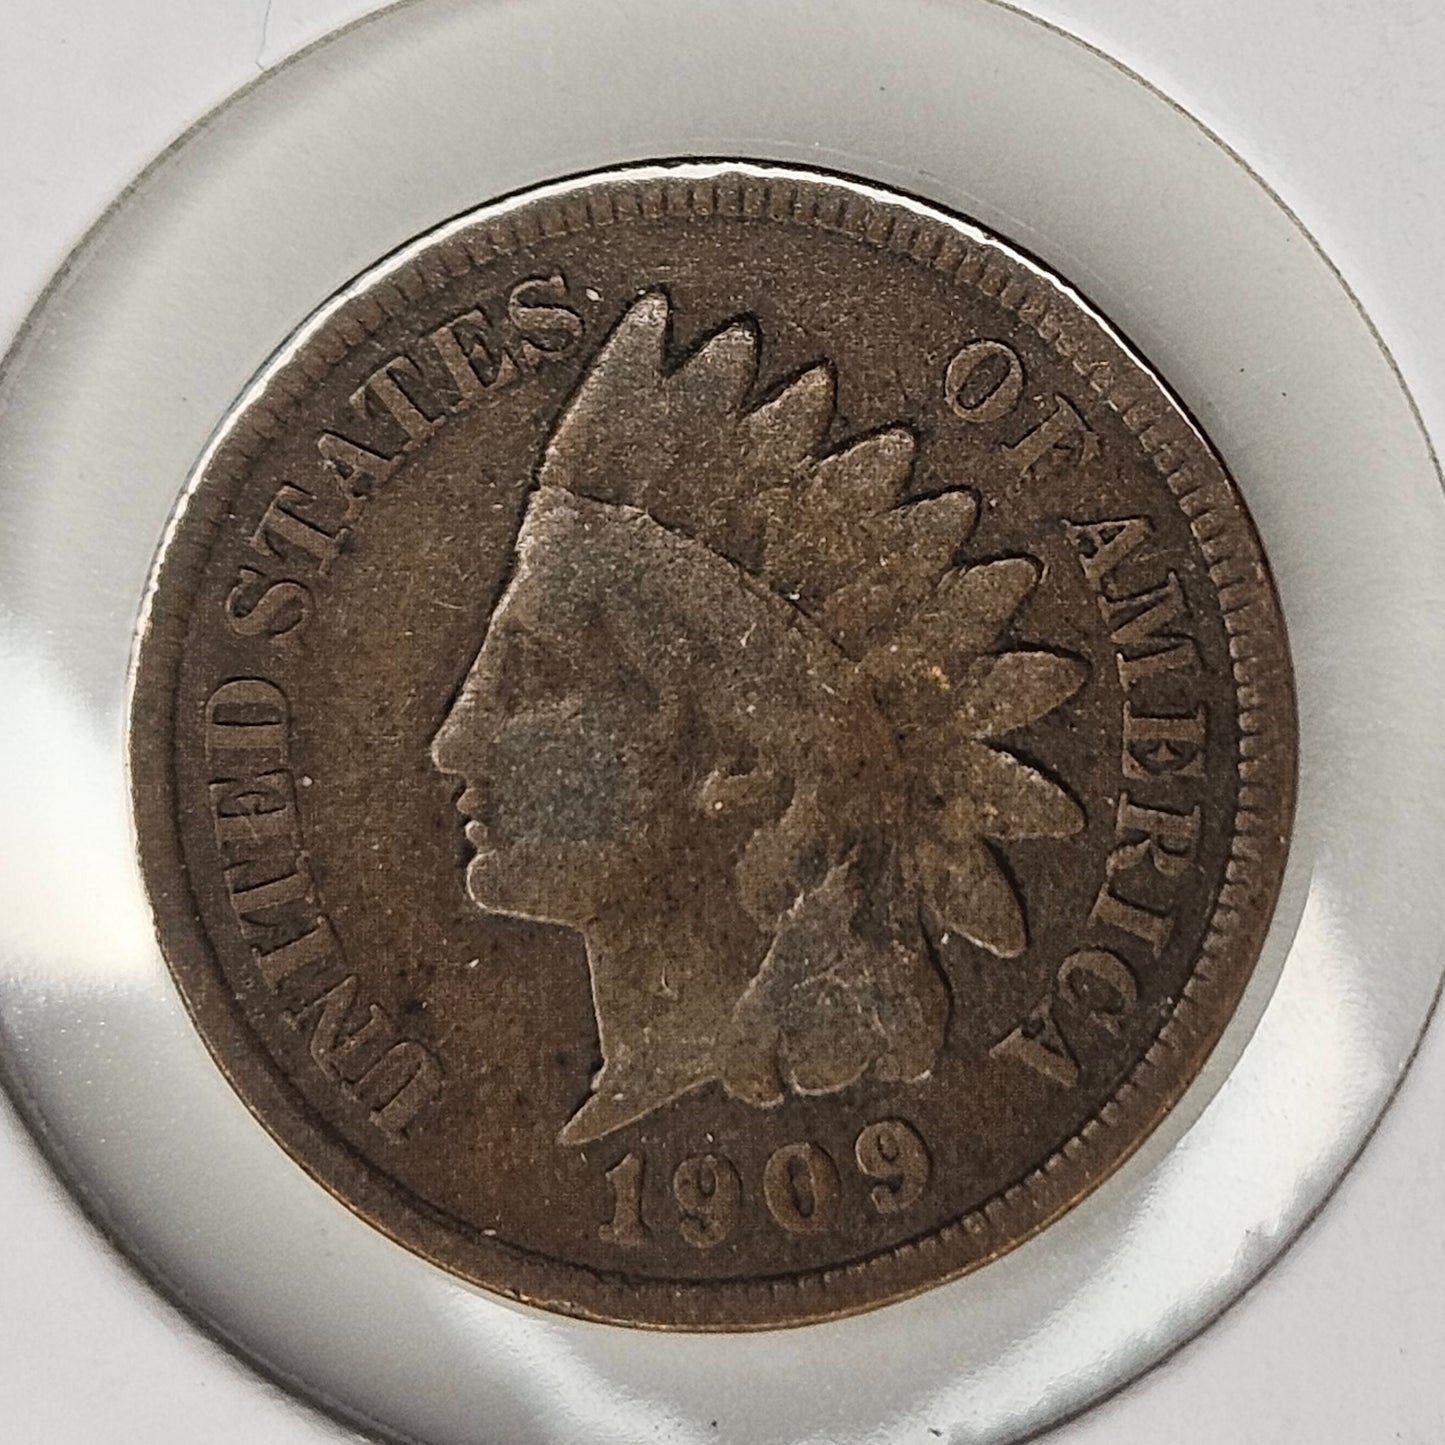 1909-P Indian Head Cent Ungraded Good  Last Year for this Desireable Series!!